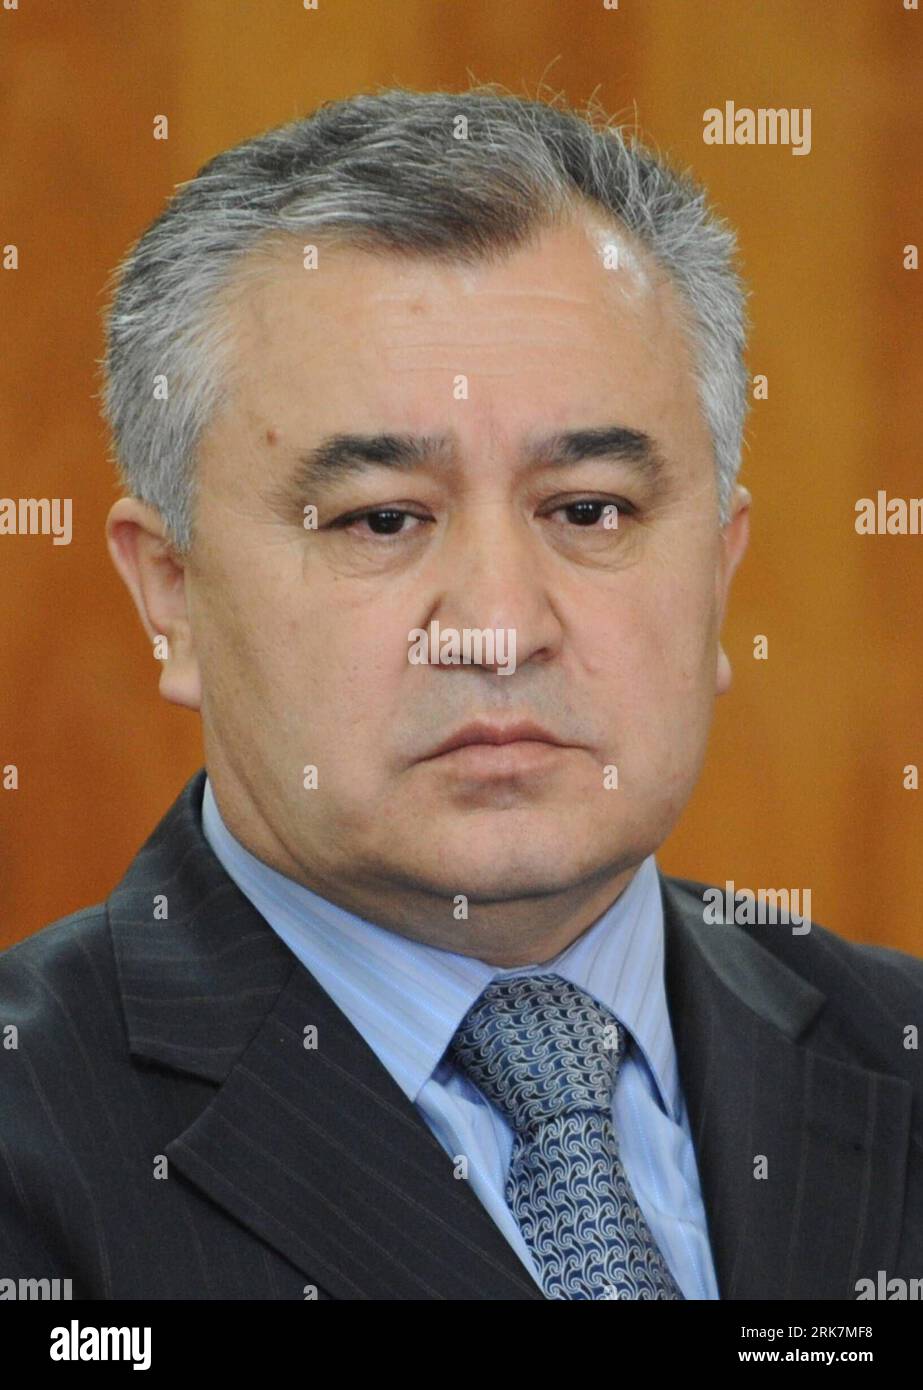 Bildnummer: 53928014  Datum: 08.04.2010  Copyright: imago/Xinhua  Omurbek Tekebayev, chairman of the opposition Ata-jurt movement (fatherland), attends a press conference in Bishkek, capital of Kyrgyzstan, April 8, 2010. Kyrgyz opposition parties on Thursday formed an interim coalition government, while President  refused to step down after clashes that left at least 75 dead and another 1,000 injured. (Xinhua/Sadat) (lmz) (5)KYRGYZSTAN-BISHKEK-UNREST-PRESS CONFERENCE PUBLICATIONxNOTxINxCHN Politik Putsch Kirgistan People Übergangsregierung Porträt PK Premiumd xint kbdig xub 2010 hoch  / Revolu Stock Photo